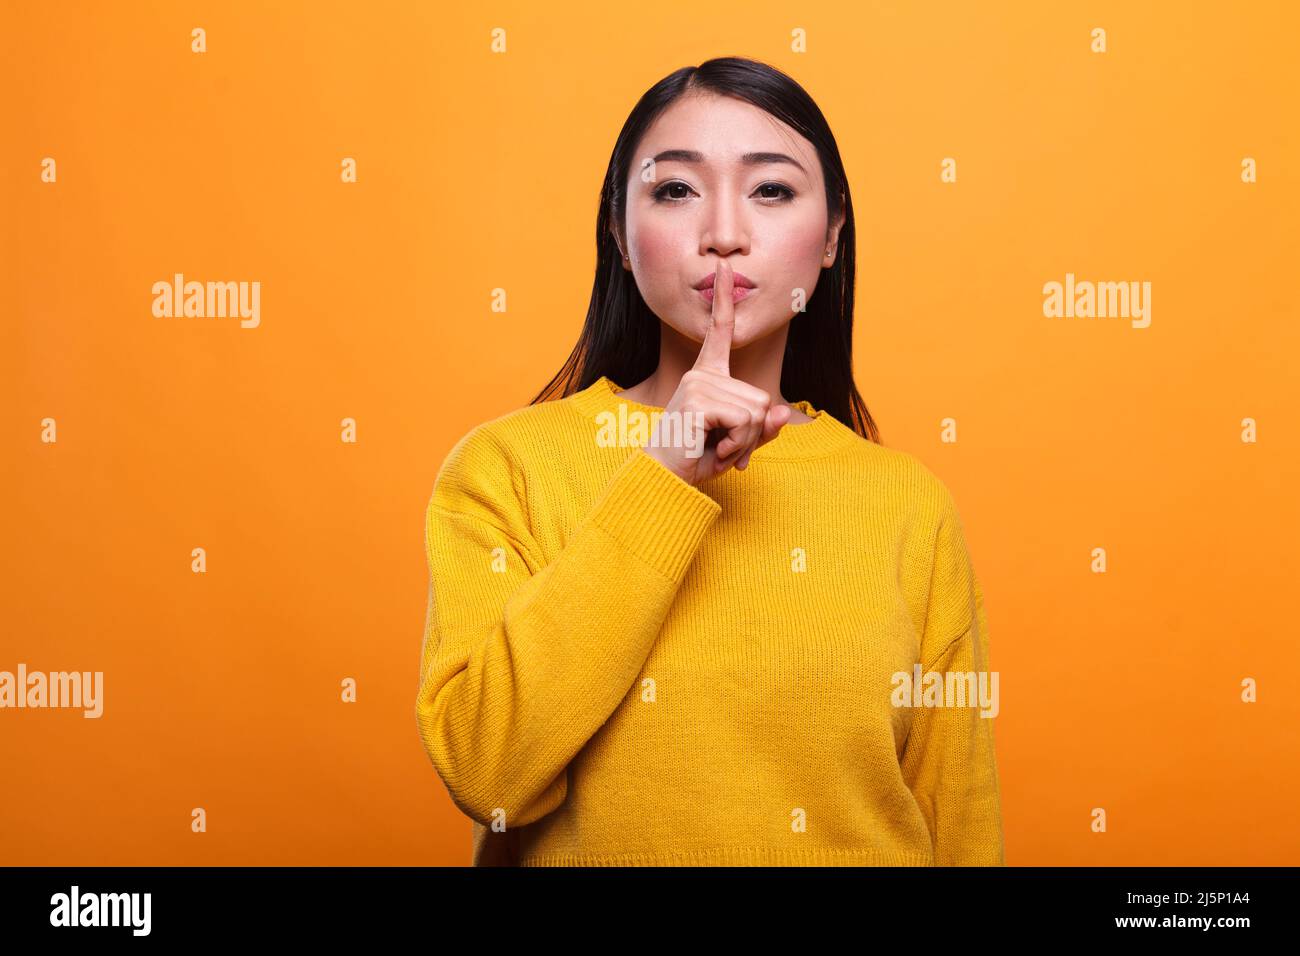 Beautiful mysterious woman wearing vibrant yellow sweater making silence gesture on orange background. Secretive person touching lips with forefinger indicating silence and secrecy. Stock Photo